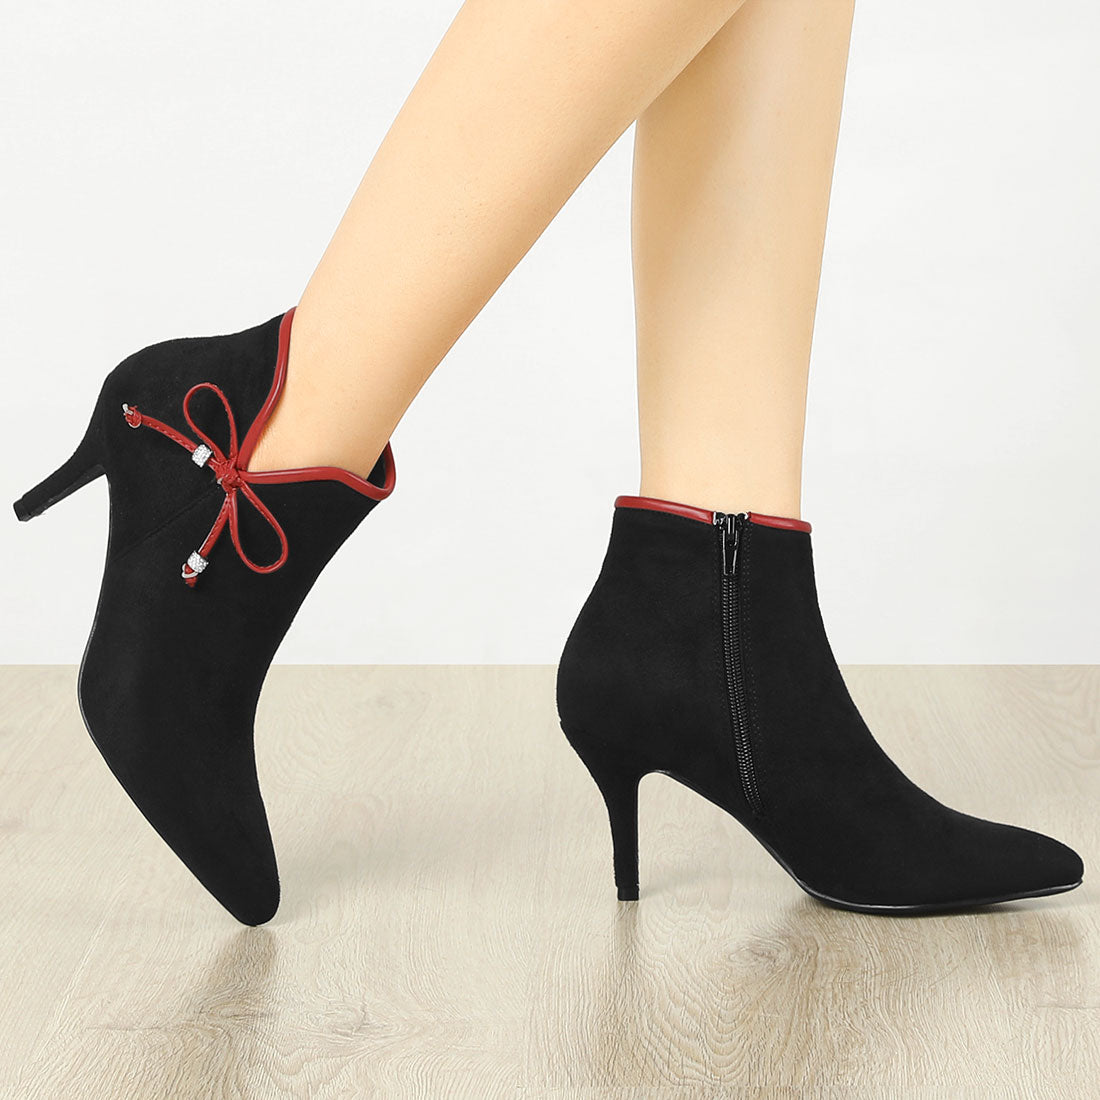 Allegra K Suede Bow Decor Pointed Toe Stiletto Heel Ankle Boots